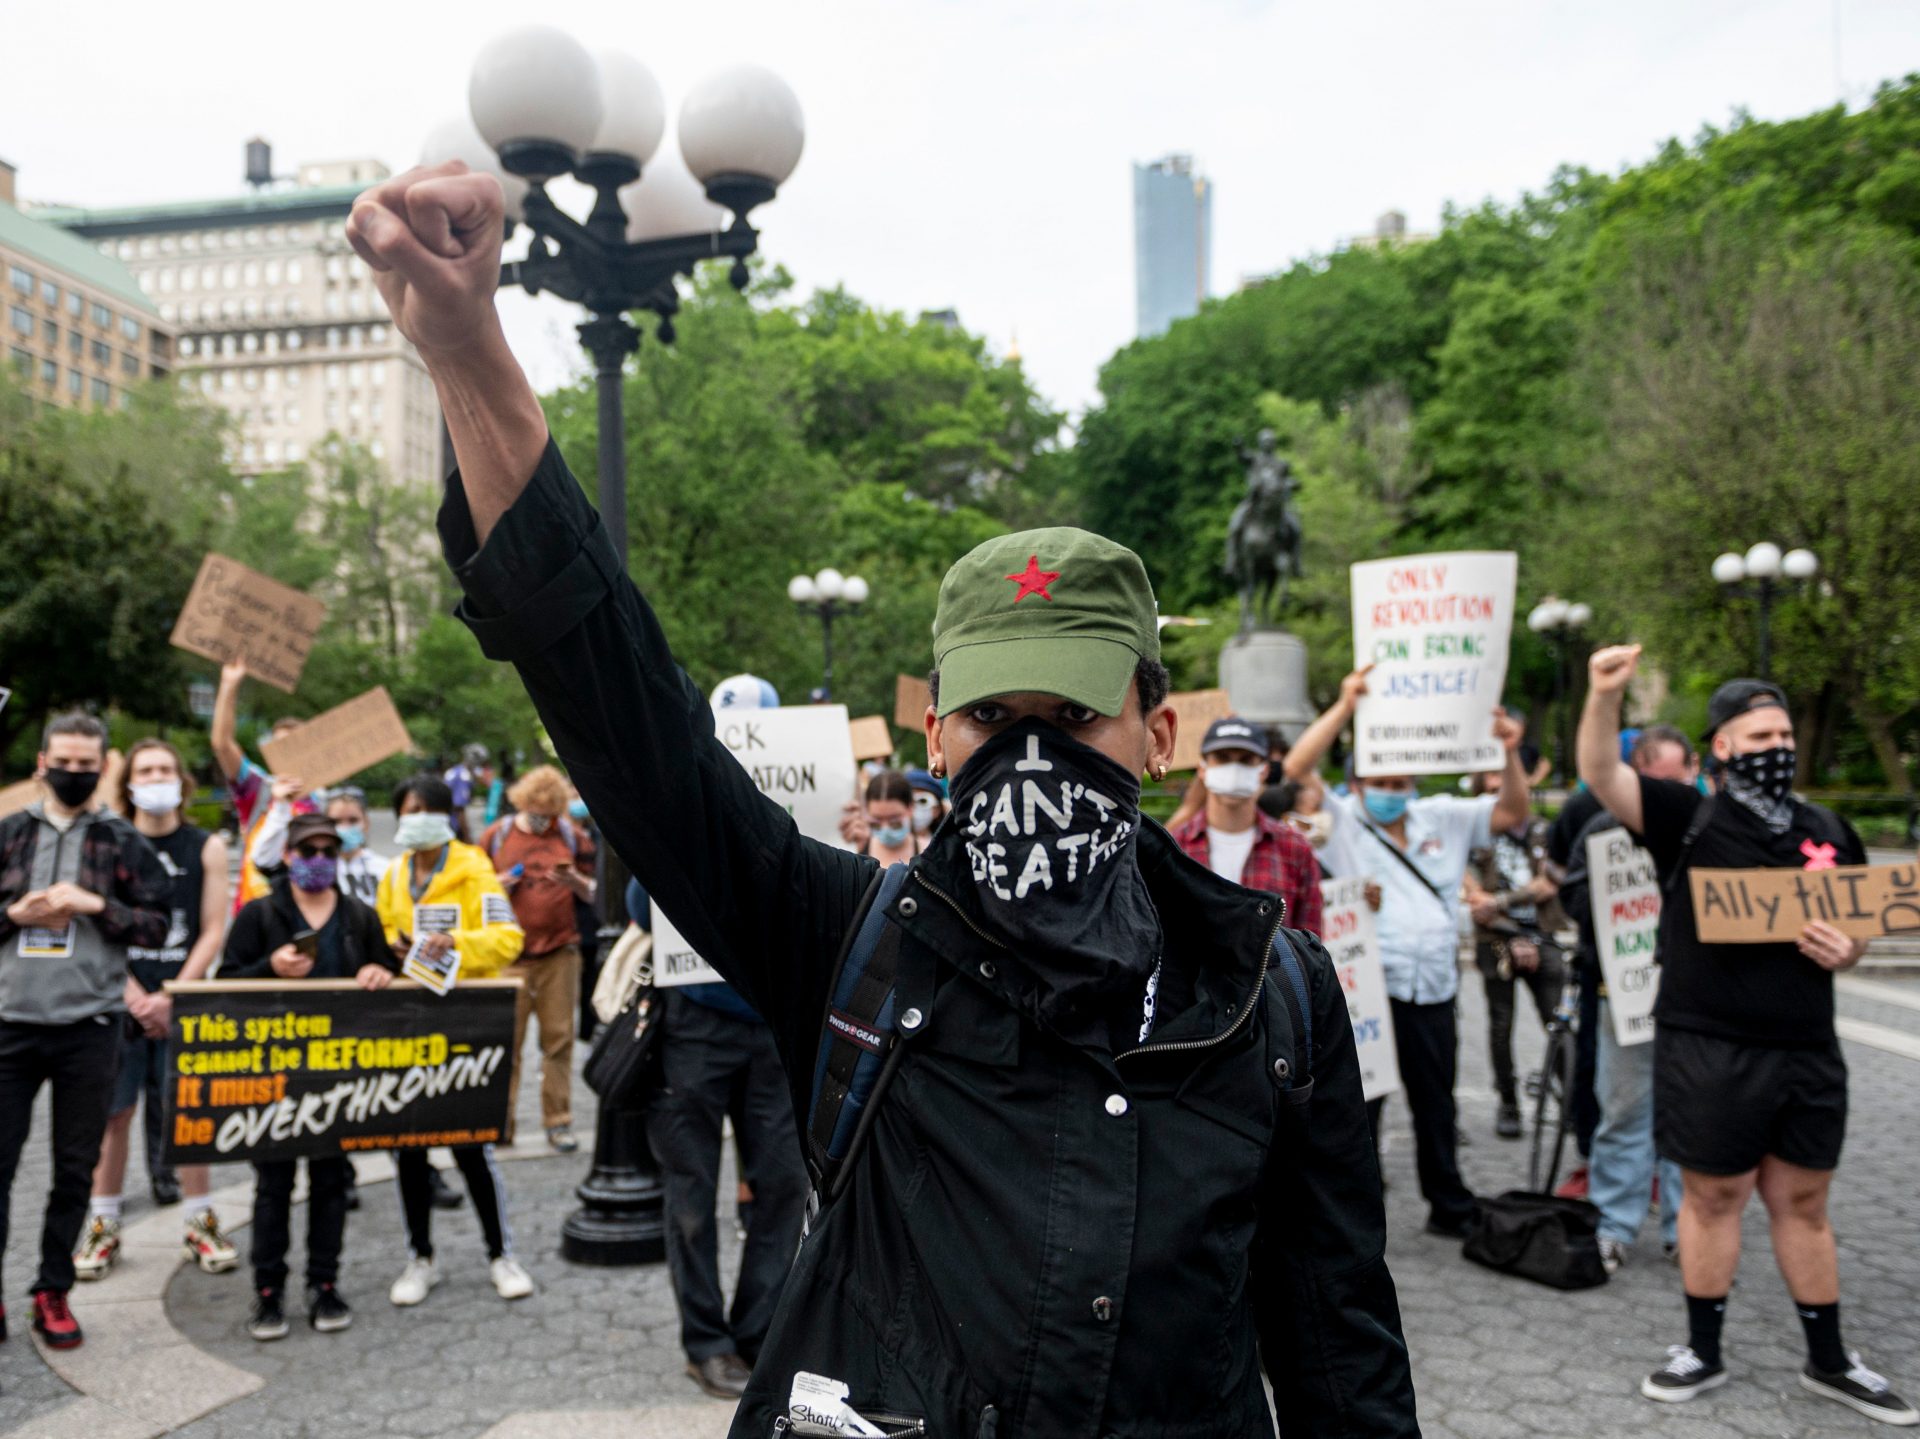 A protester raises a fist during a "Black Lives Matter" demonstration Thursday in New York City -- just one of a number of protests nationwide inspired by Floyd's death in Minneapolis.